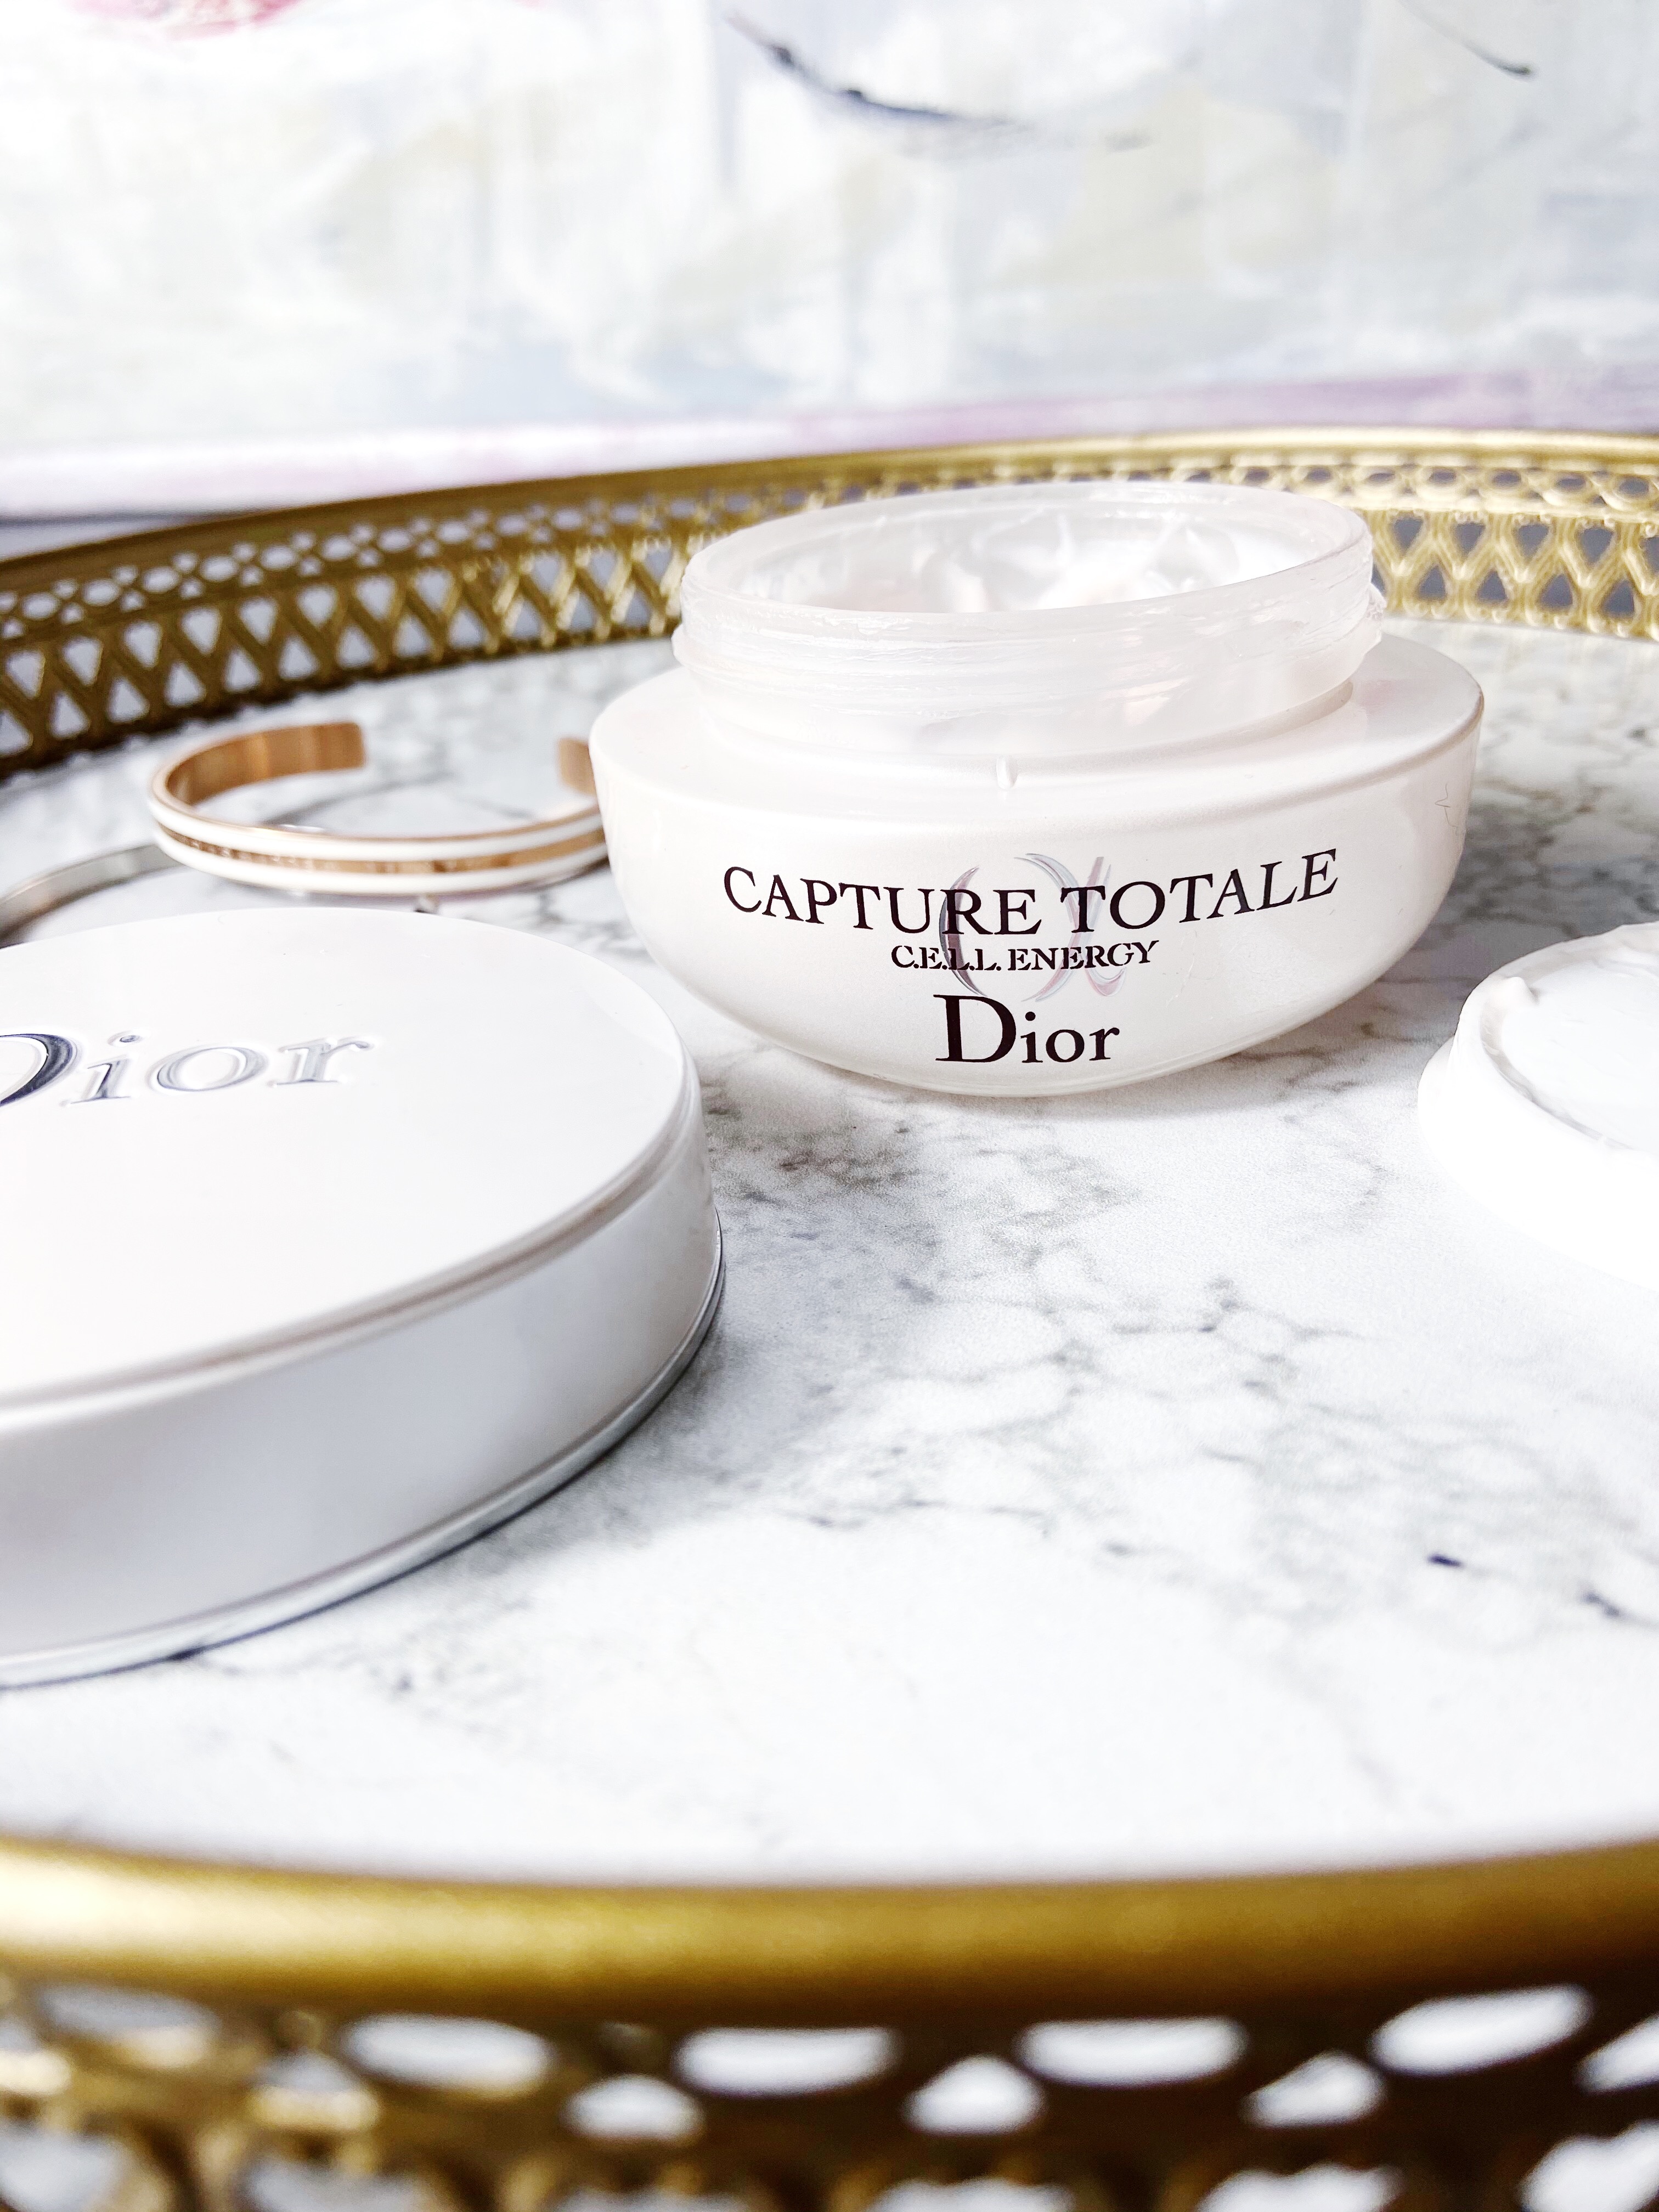 capture-total-cell-energy-dior-cosmetiques-luxe-anti-age